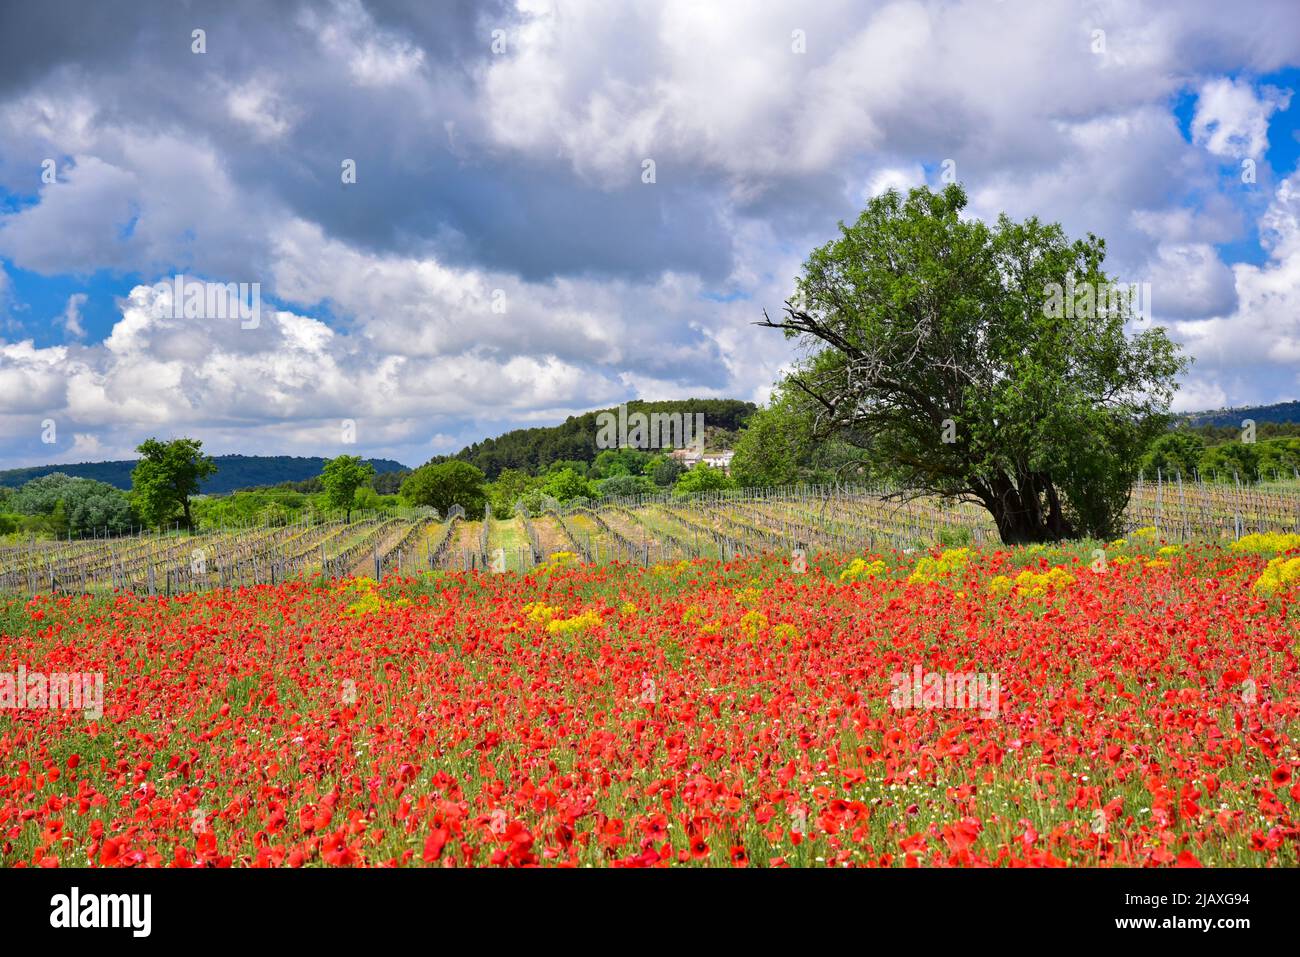 Blooming field of poppies in the Luberon, near the village of Gordes in Provence, Var department, France, Europe Stock Photo